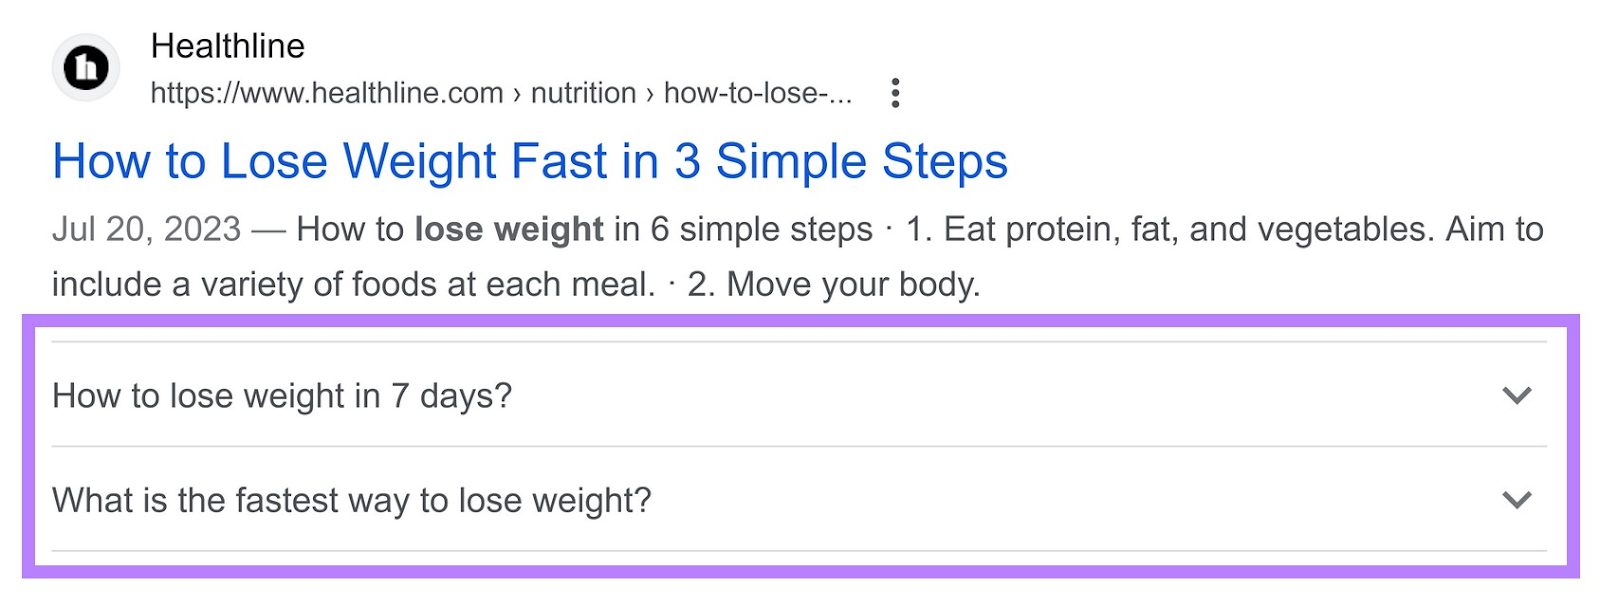 an example of a frequently asked question (FAQ) snippet for "how to lose weight fast" search